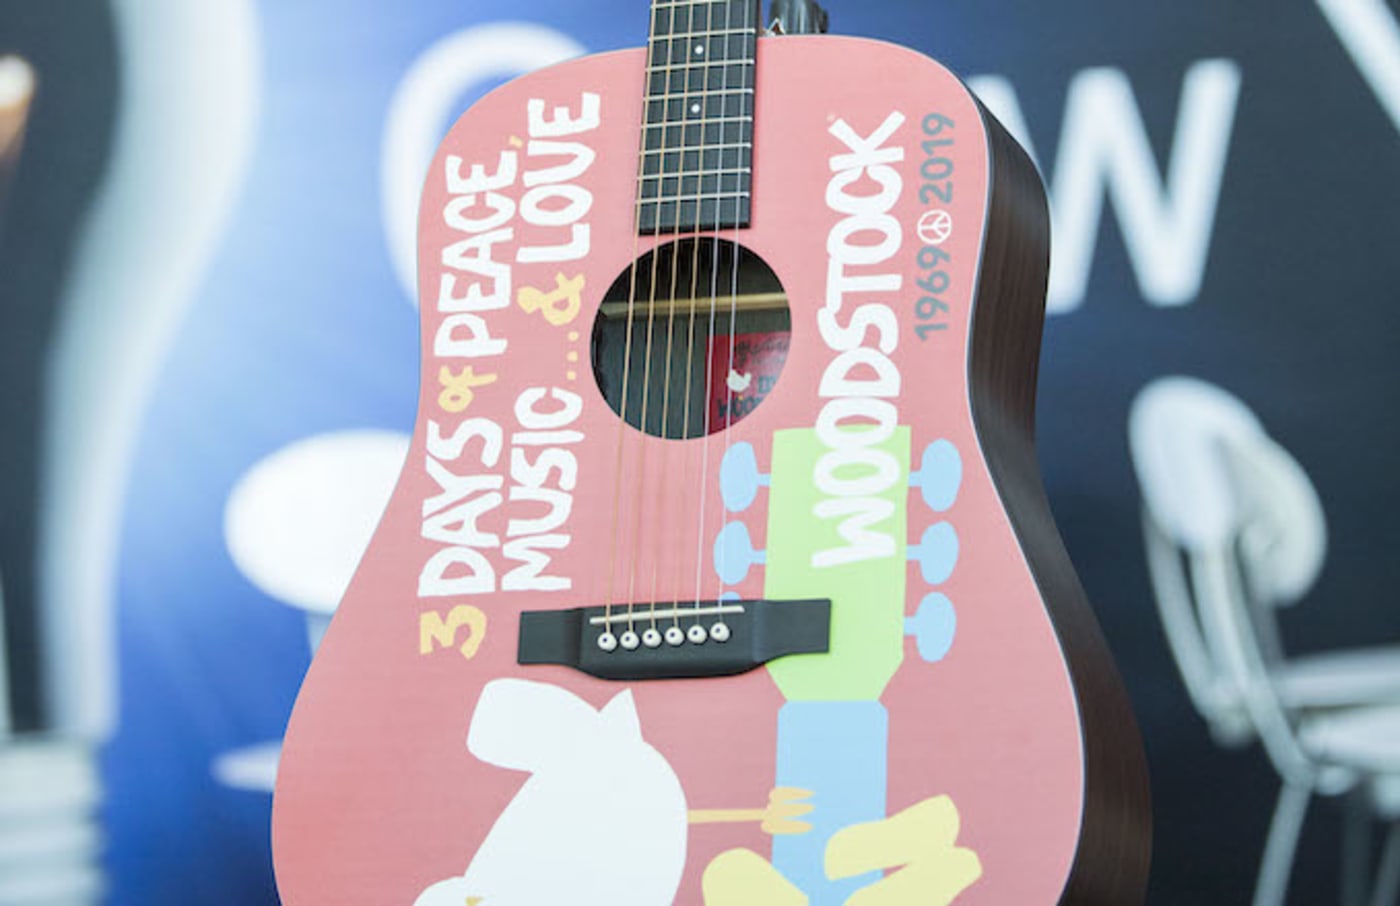 woodstock 50 plans to continue